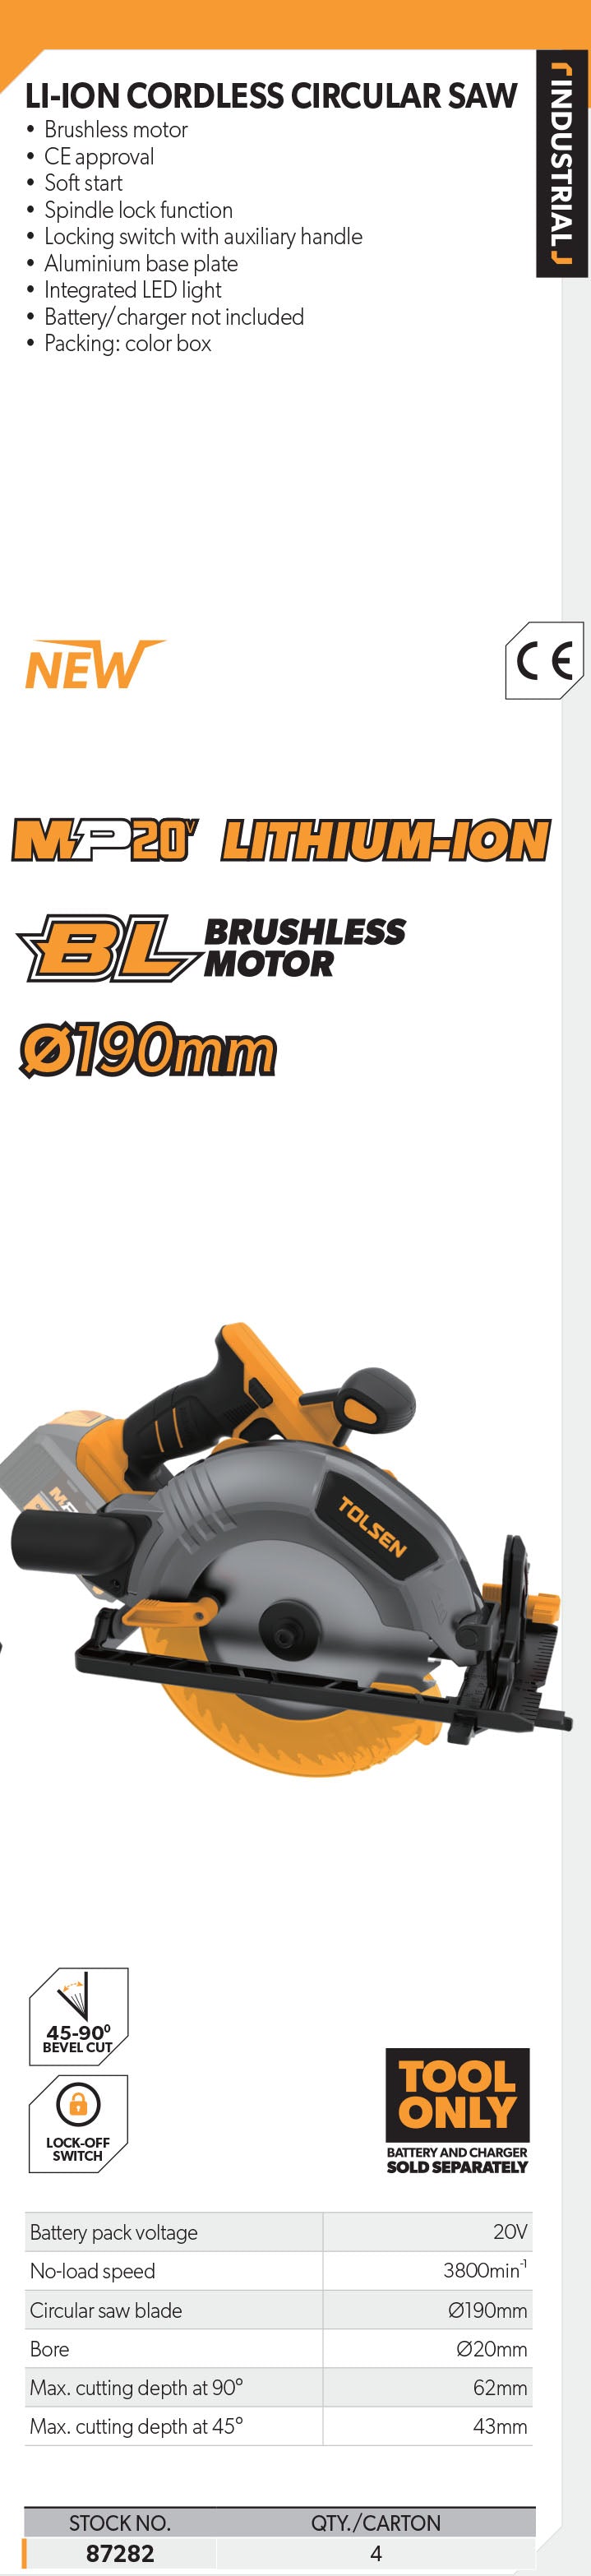 LI-ION Brushless Cordless Circular Saw 190mm (All in One 20V Battery)